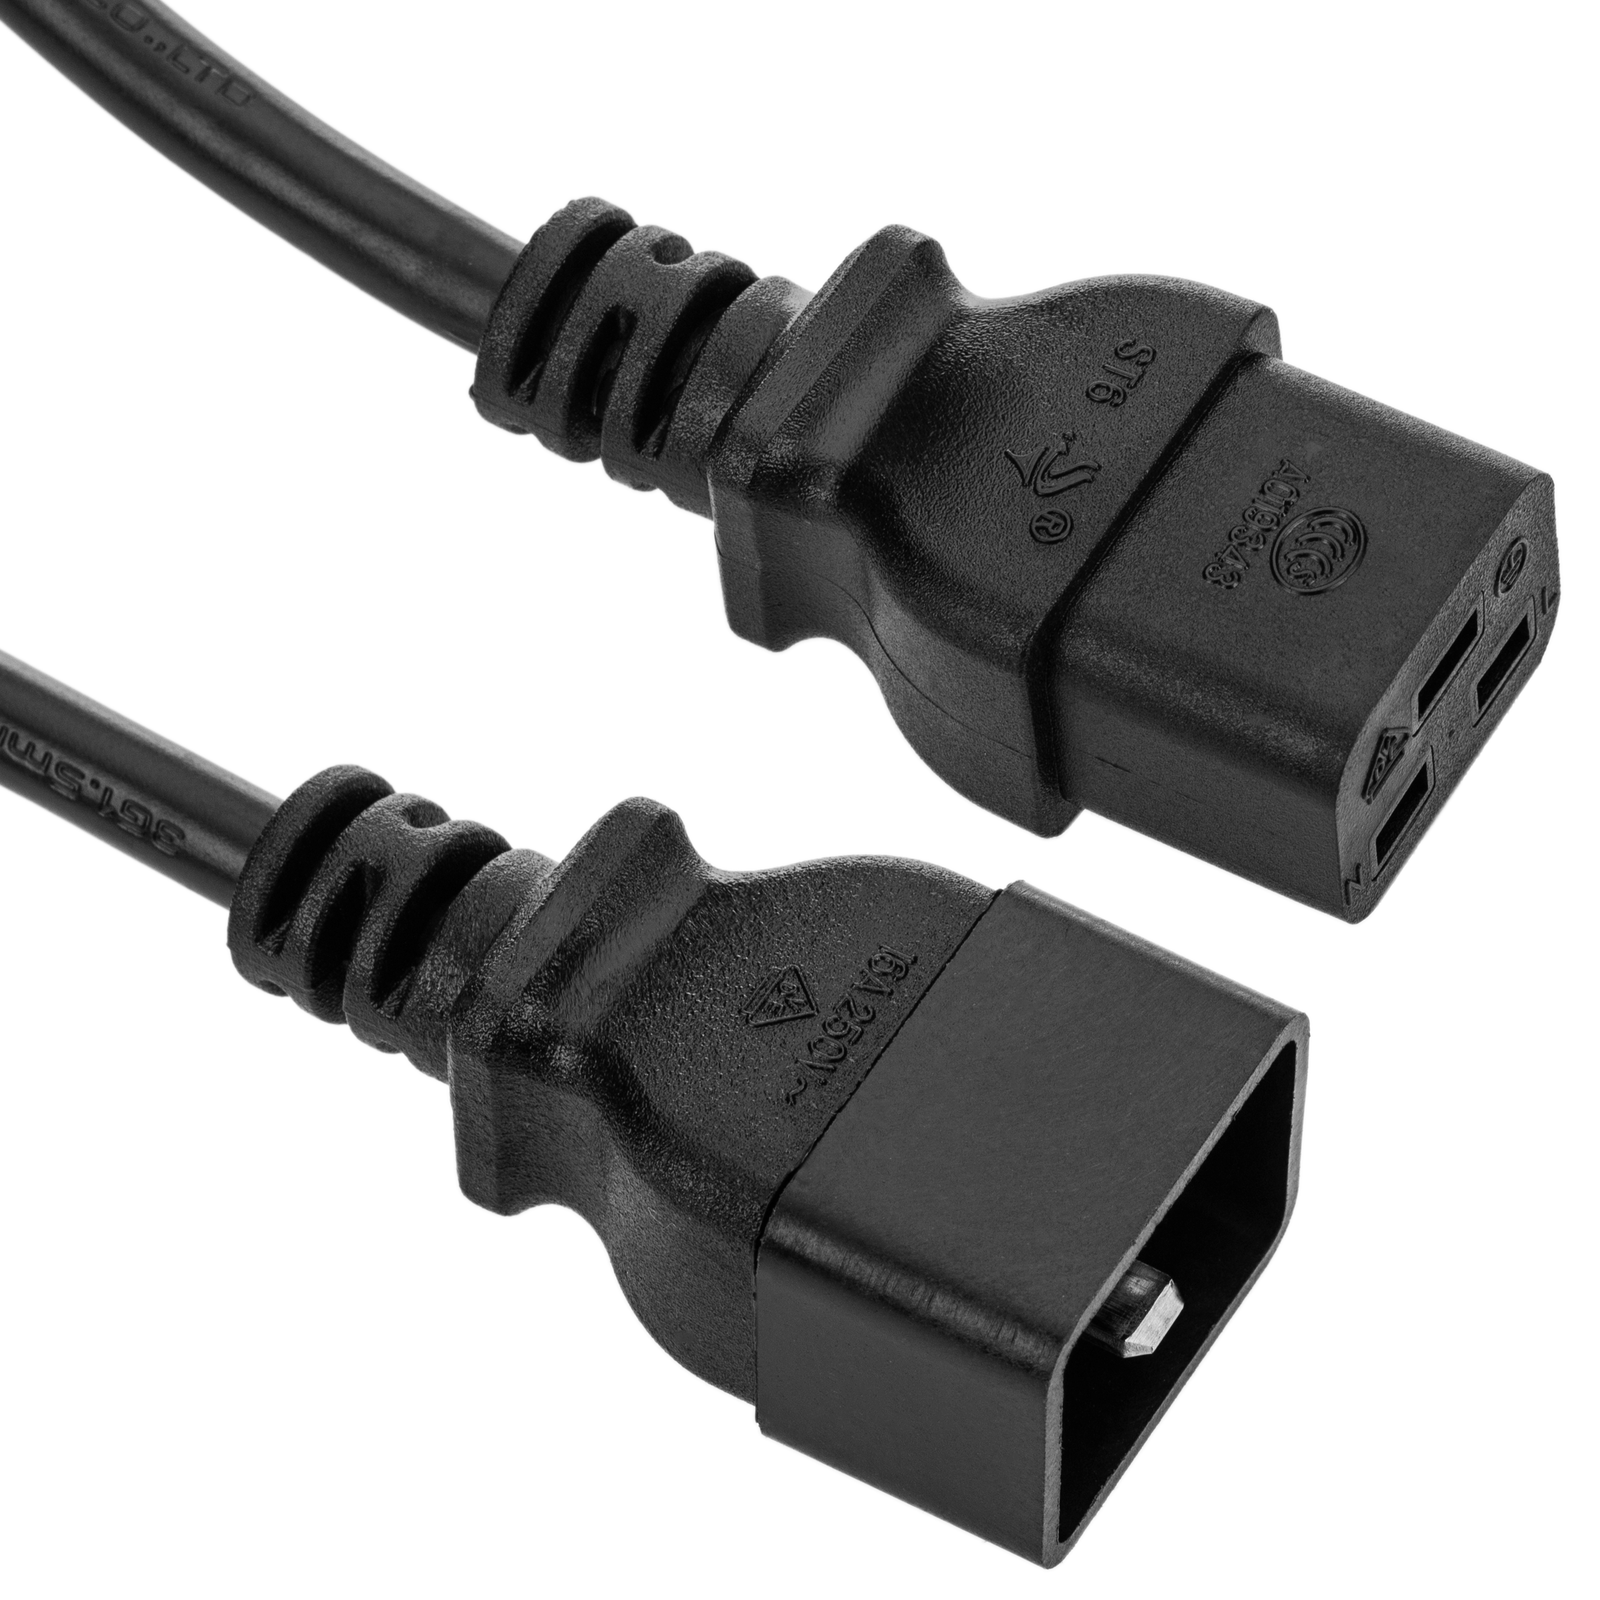 Cable HDMI 1.4 blanco 1m - Cablematic